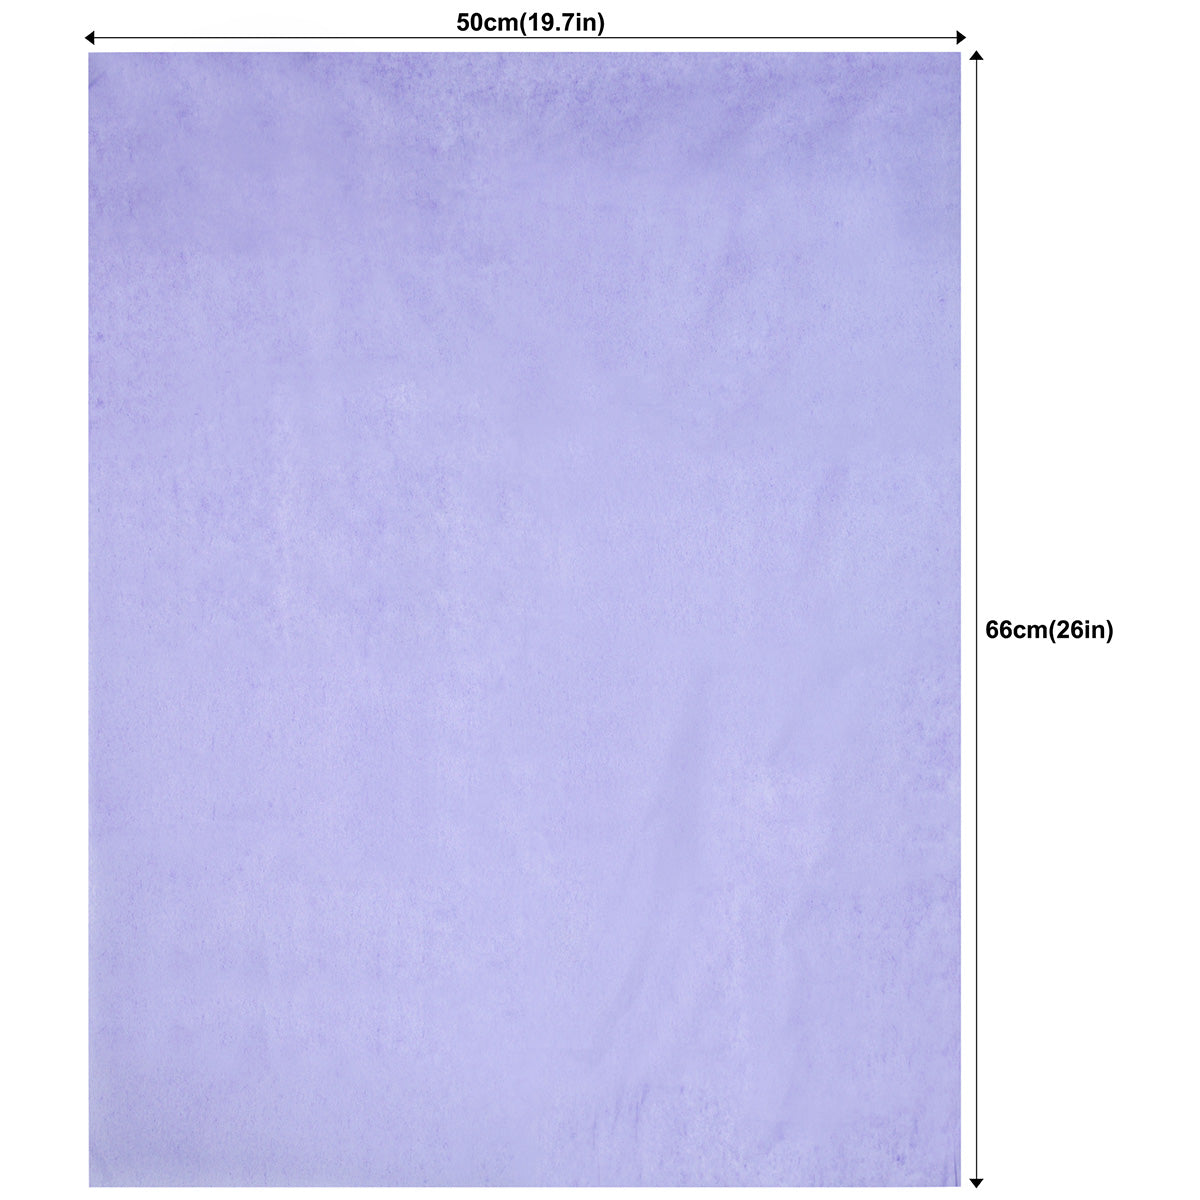 50 Sheets Light Purple Wrapping Tissue Paper